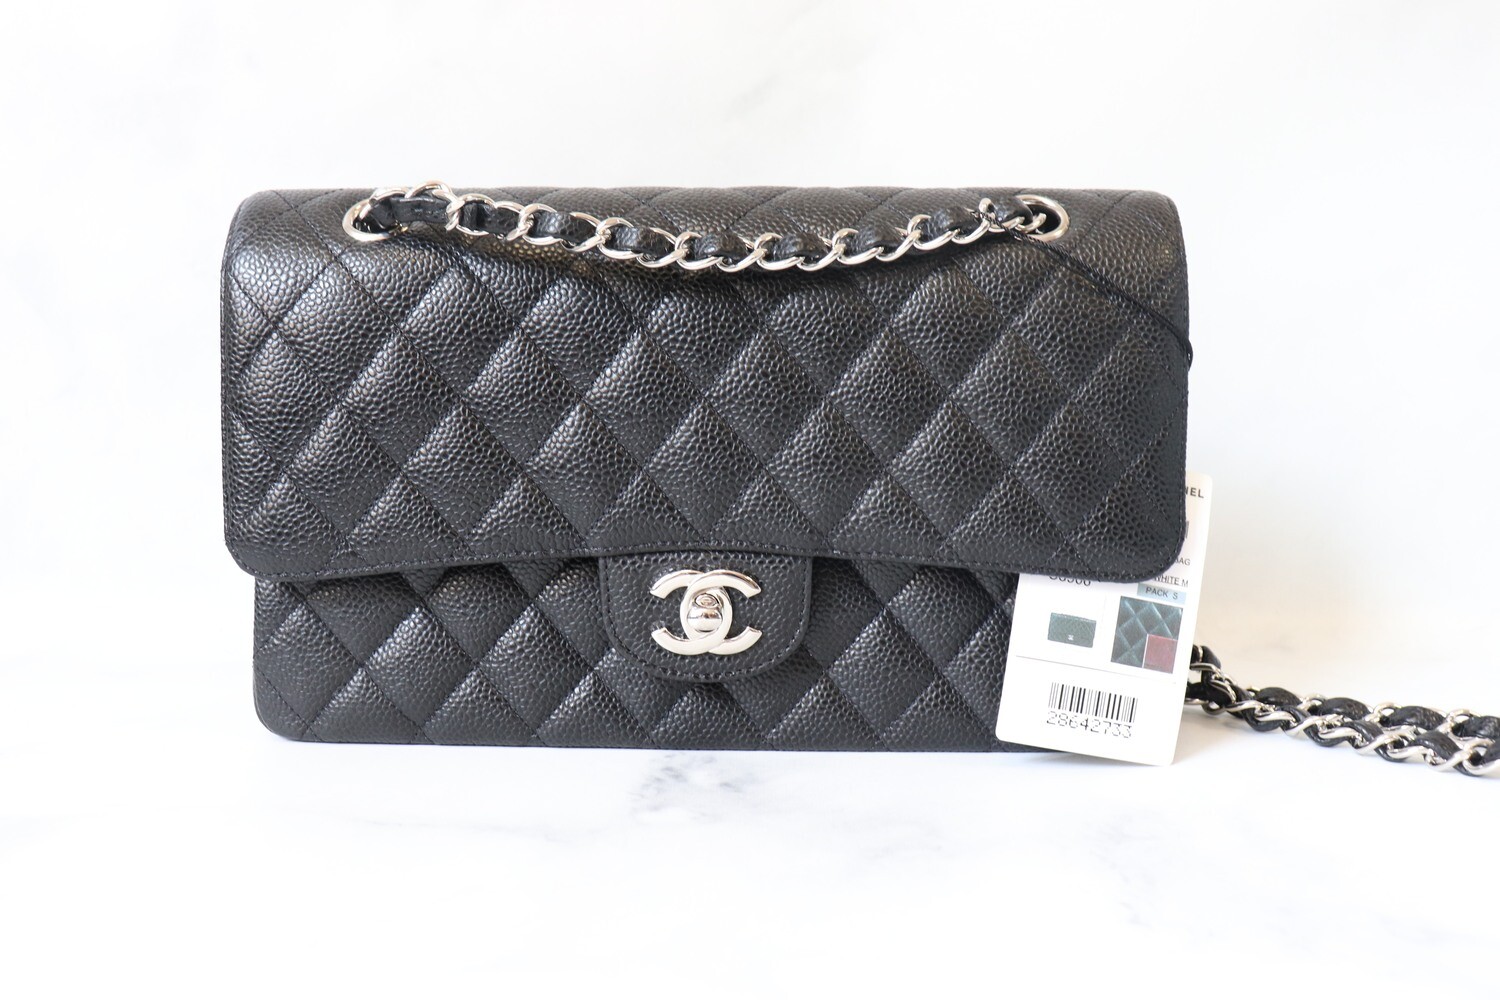 Shop authentic new, pre-owned, vintage Chanel classic flaps, 2.55